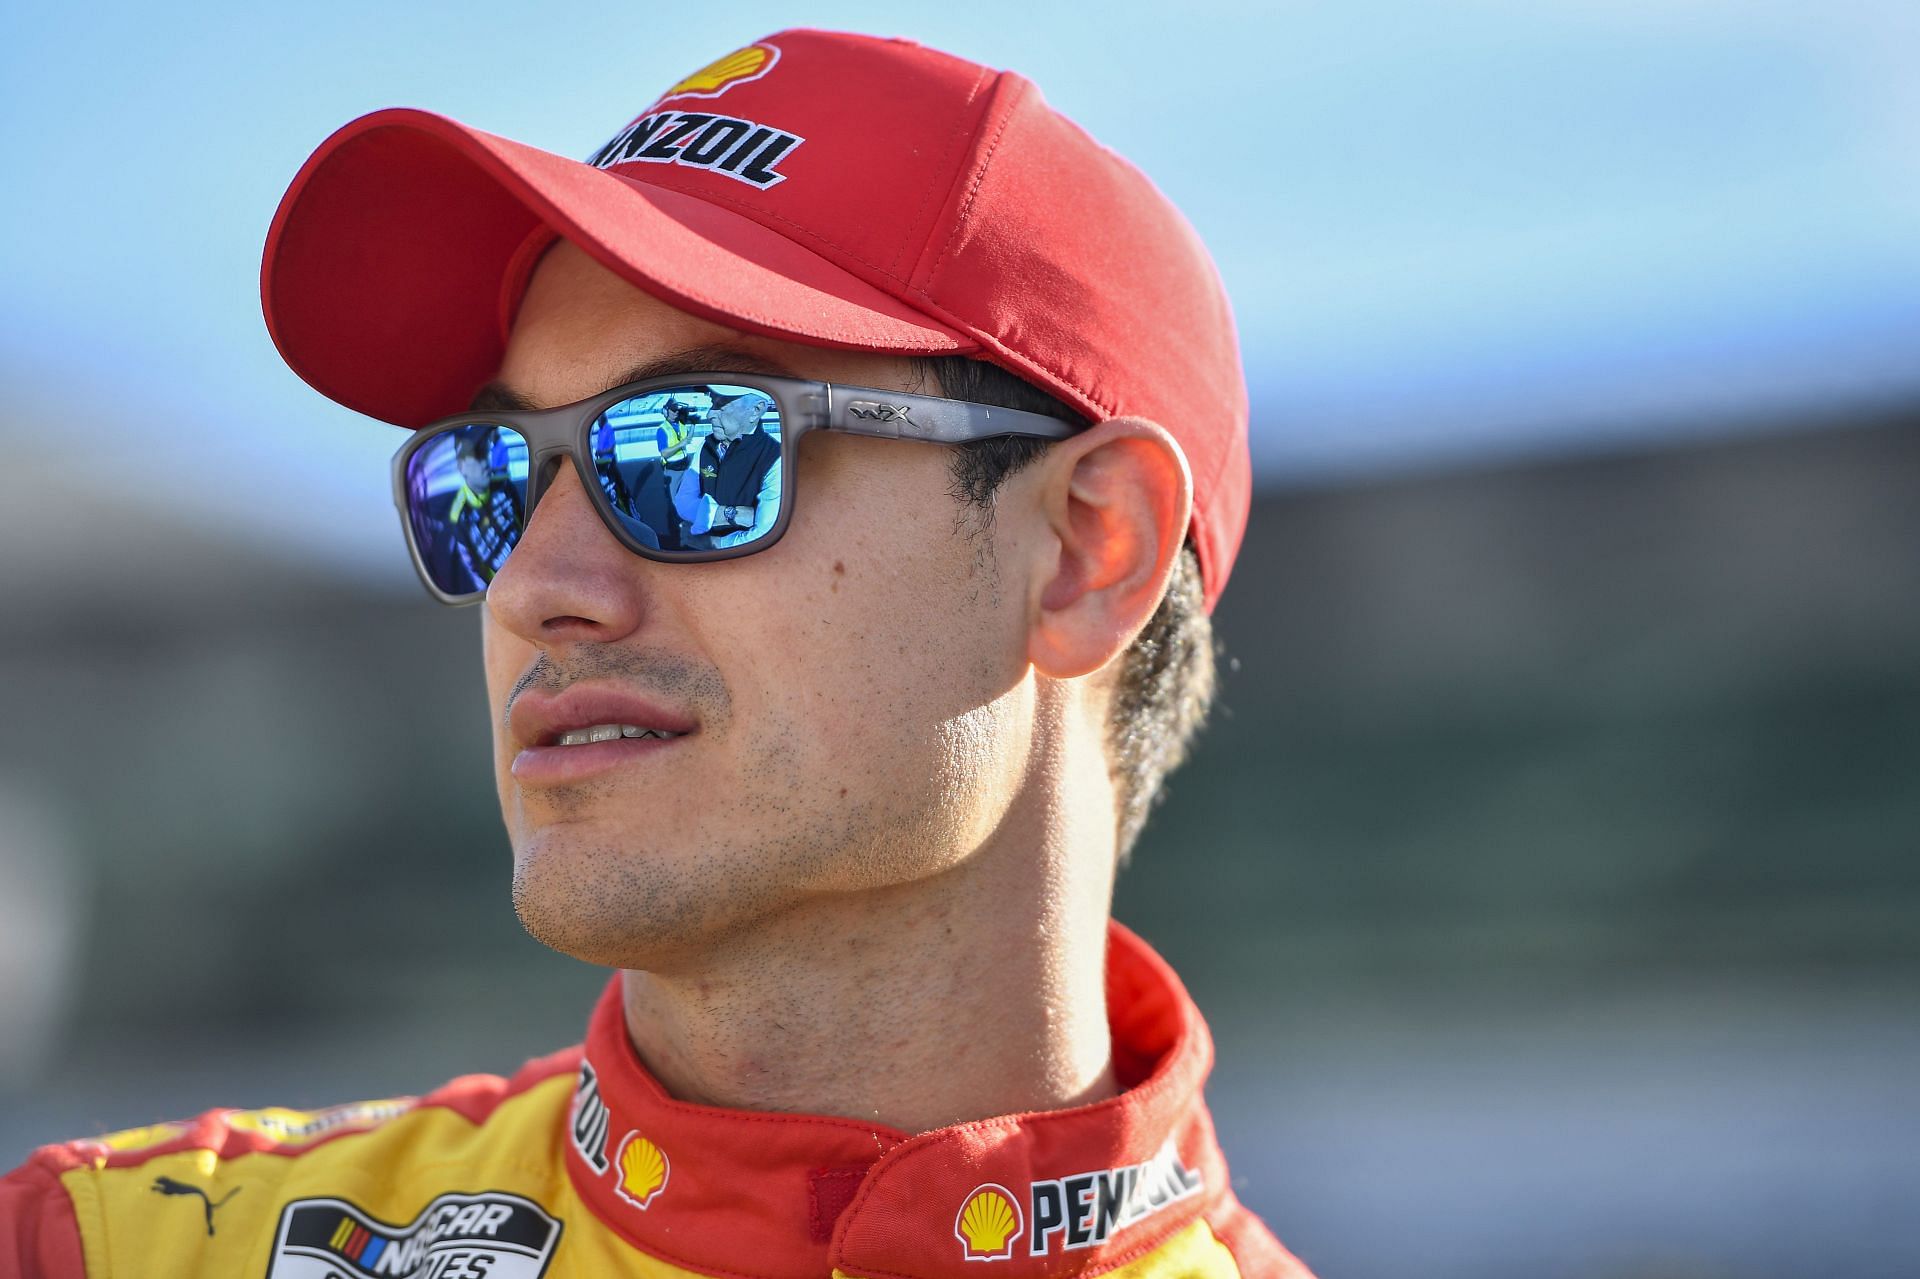 Joey Logano waits on the grid during practice for the 2022 NASCAR Cup Series Verizon 200 at the Brickyard at Indianapolis Motor Speedway in Indianapolis, Indiana. (Photo by Logan Riely/Getty Images)